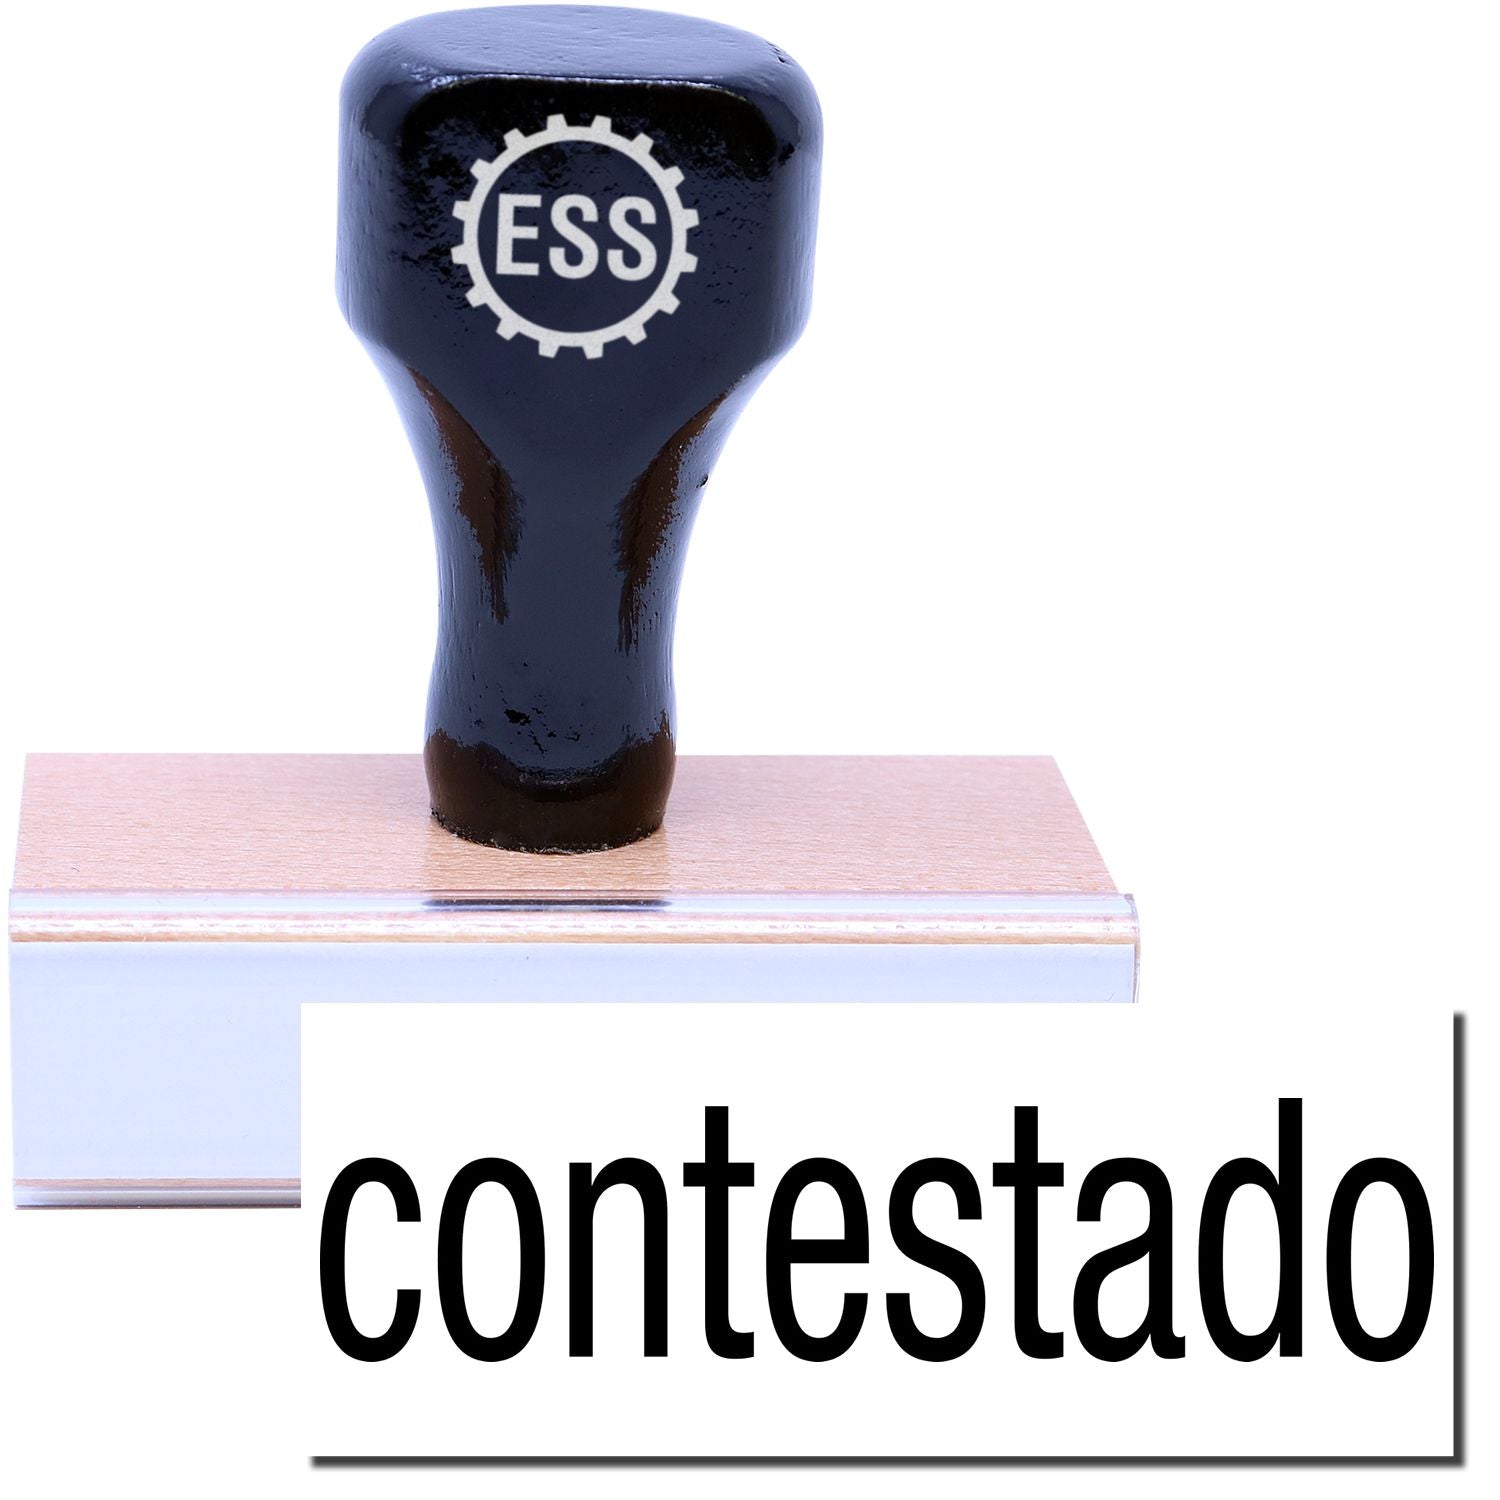 A stock office rubber stamp with a stamped image showing how the text "contestado" is displayed after stamping.